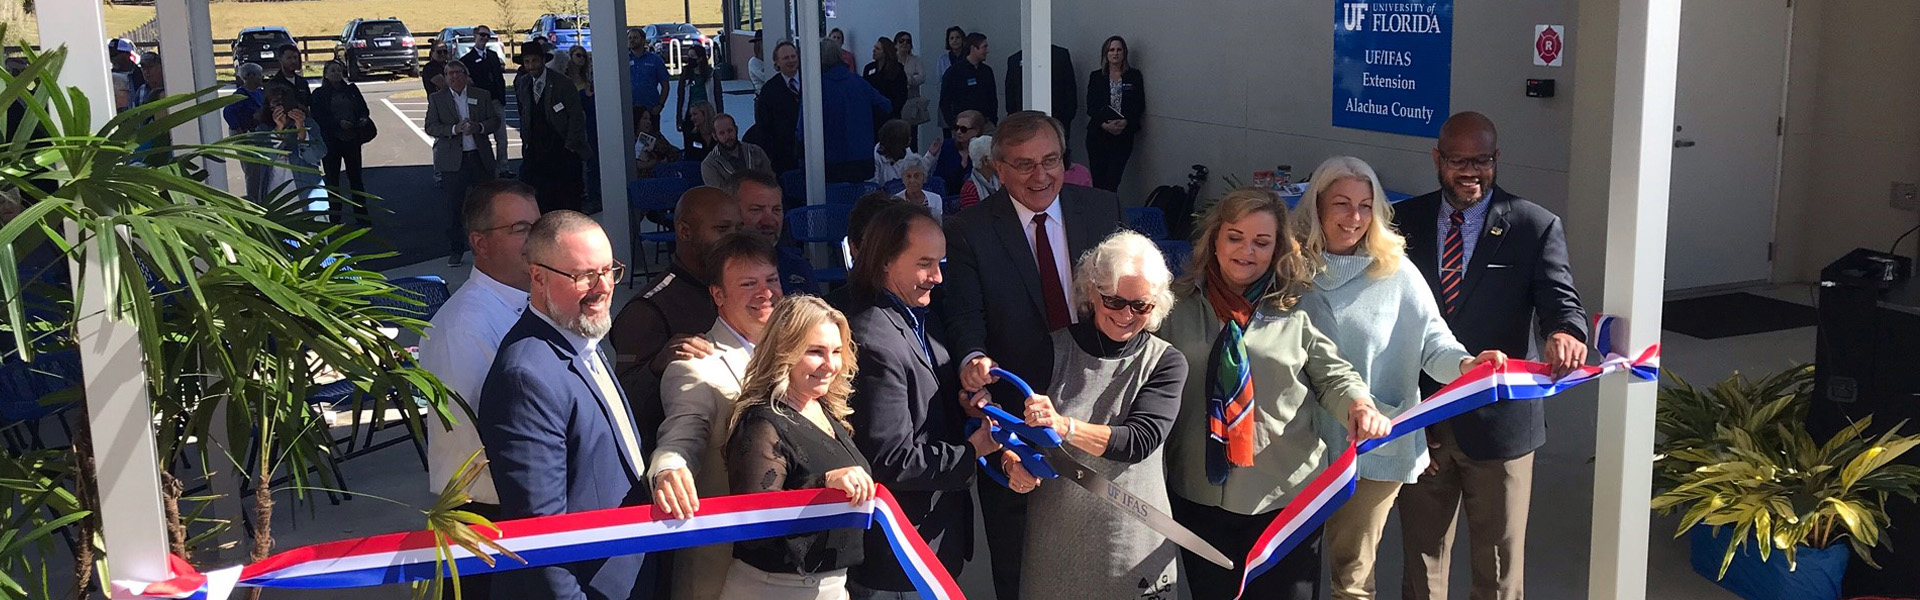 GO to New UF/IFAS Alachua County extension office, auditorium opens in Newberry